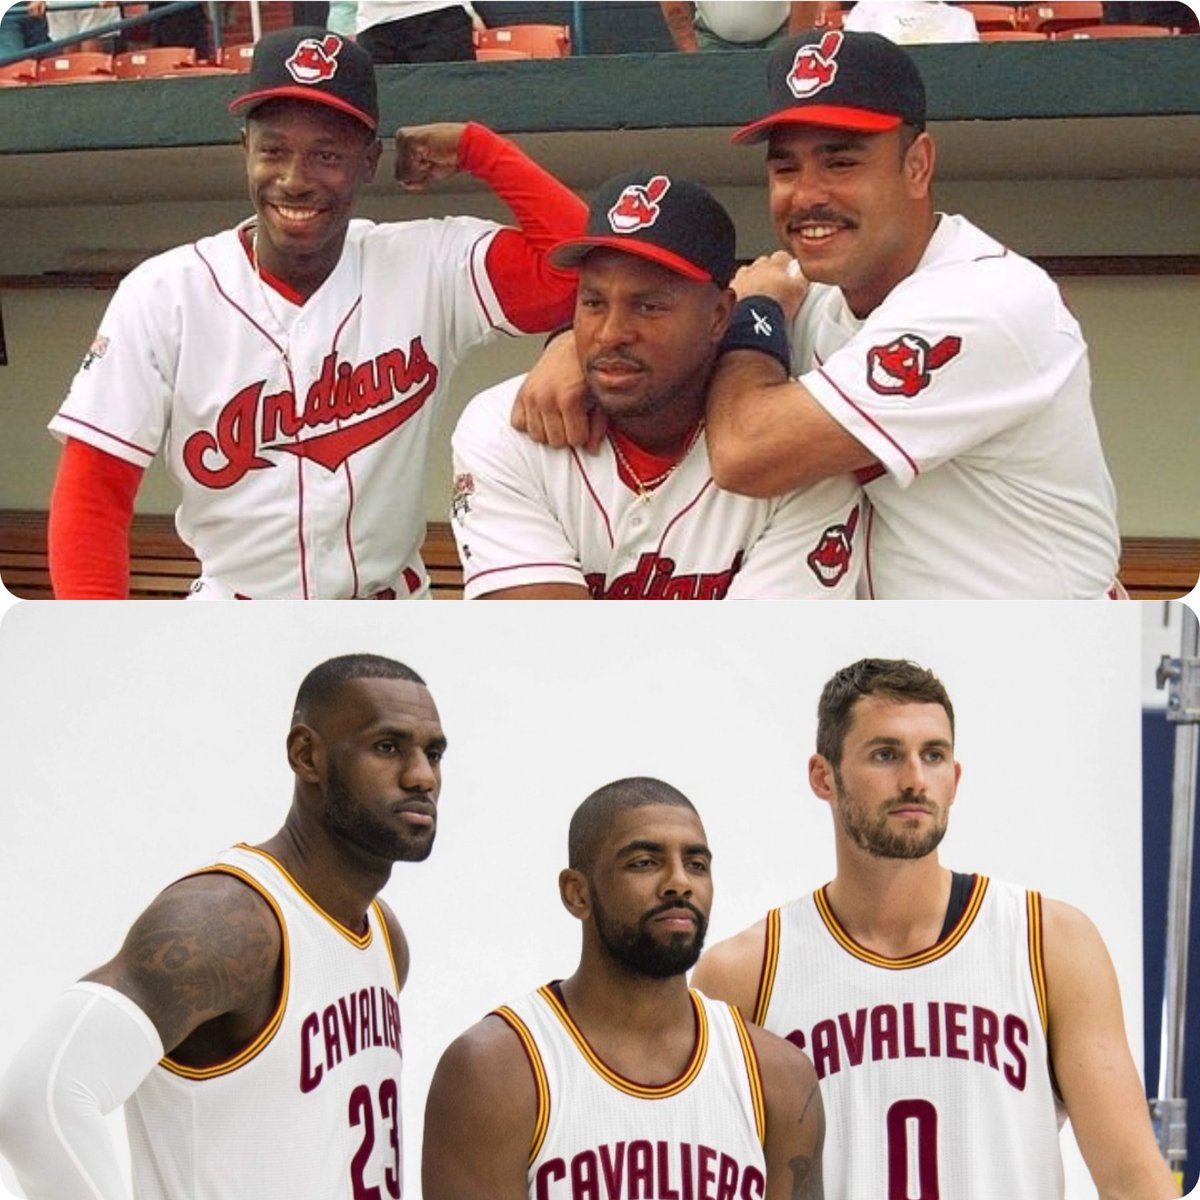 Which group was more fun, the 90's Indians or 'Big 3 Era' Cavs?